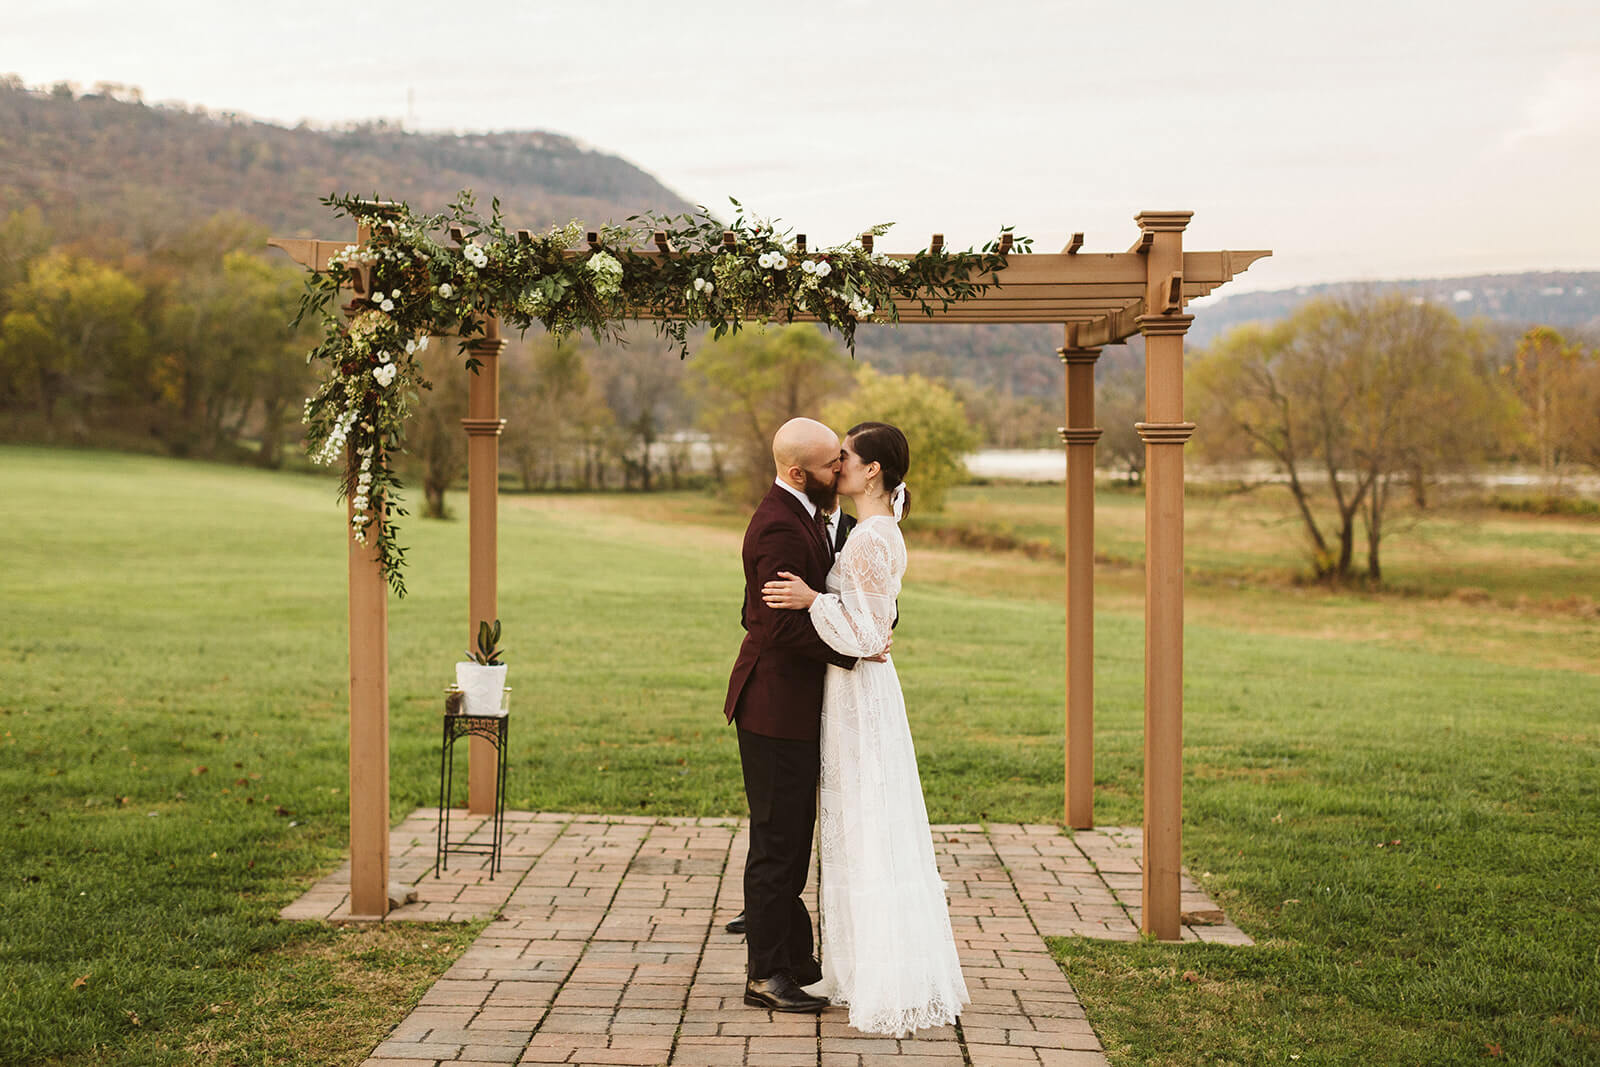 A bride and groom kiss beneath a floral arbor in front of mountains and the river in Chattanooga, TN.